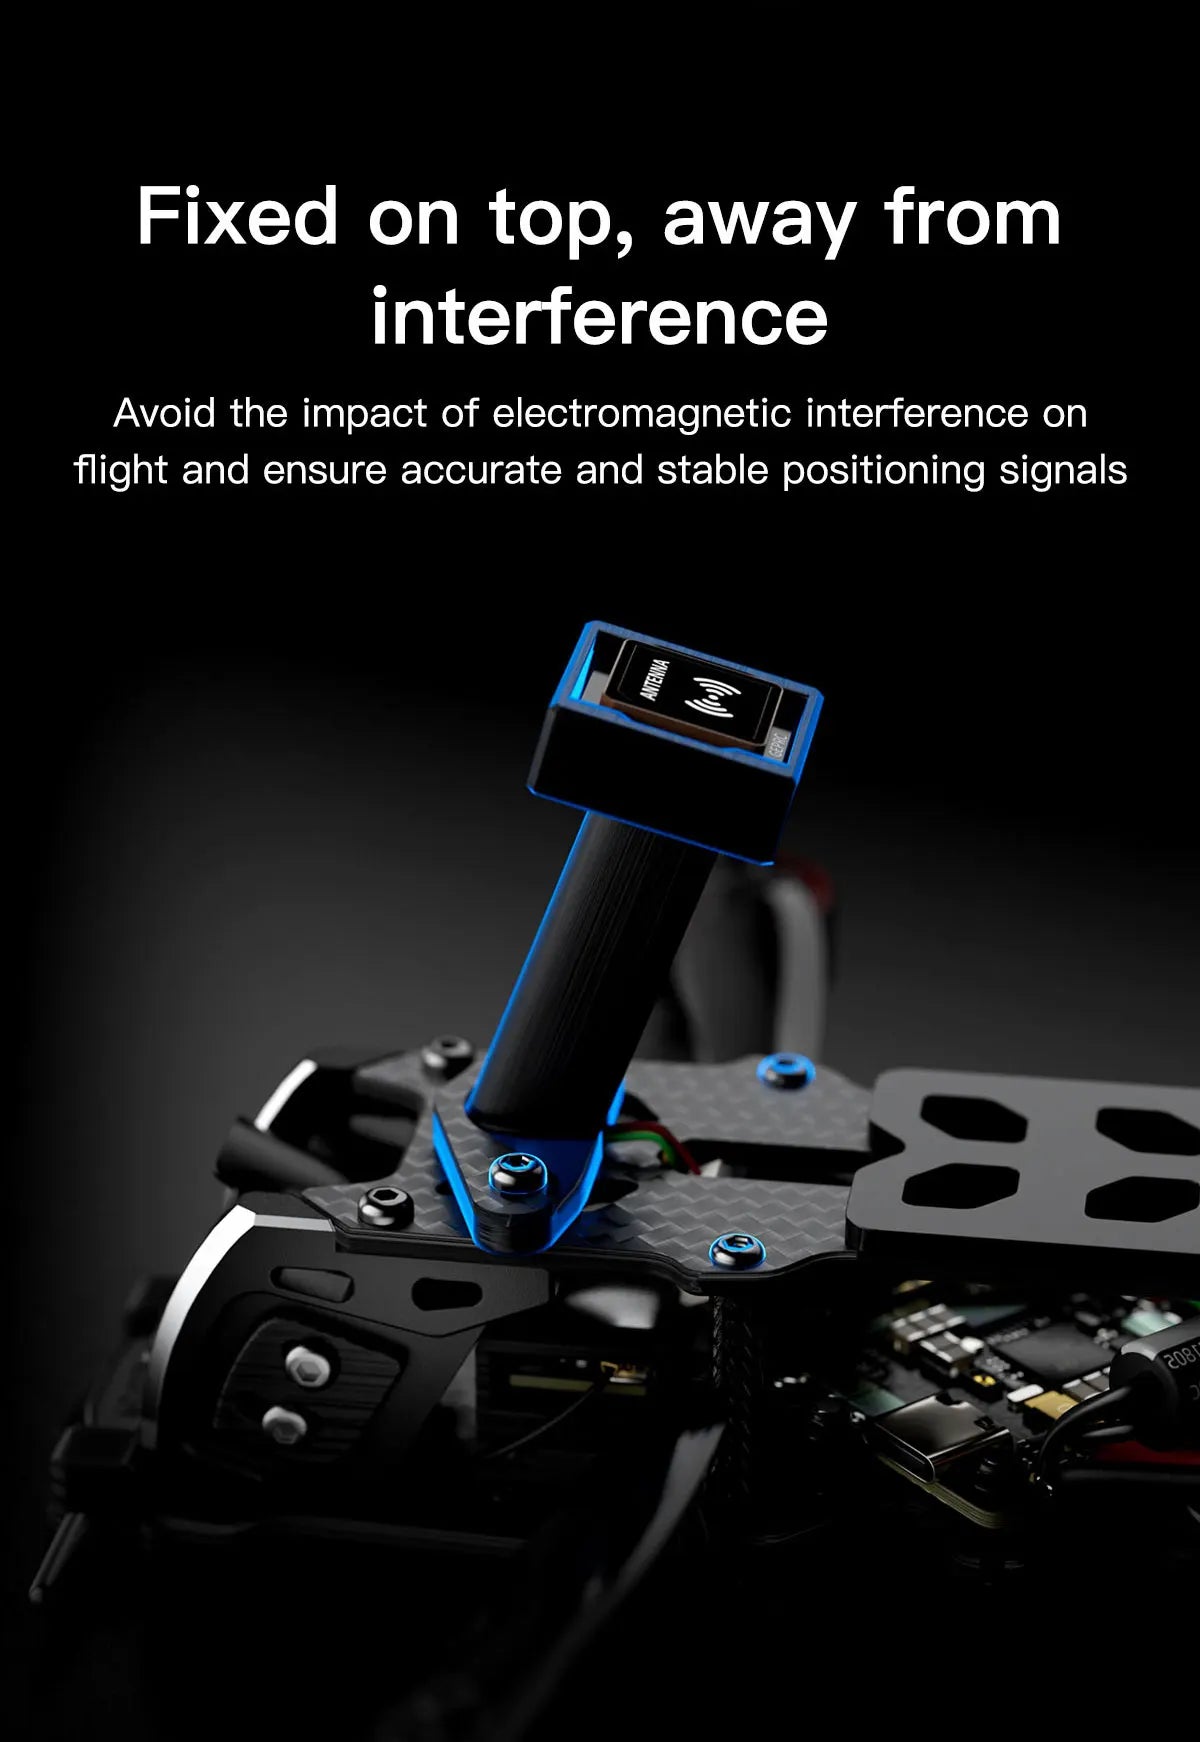 GEPRC Tern-LR40 Analog Long Range FPV, fixed on top, away from interference Avoid the impact of electromagnetic interference on flight . ensure accurate